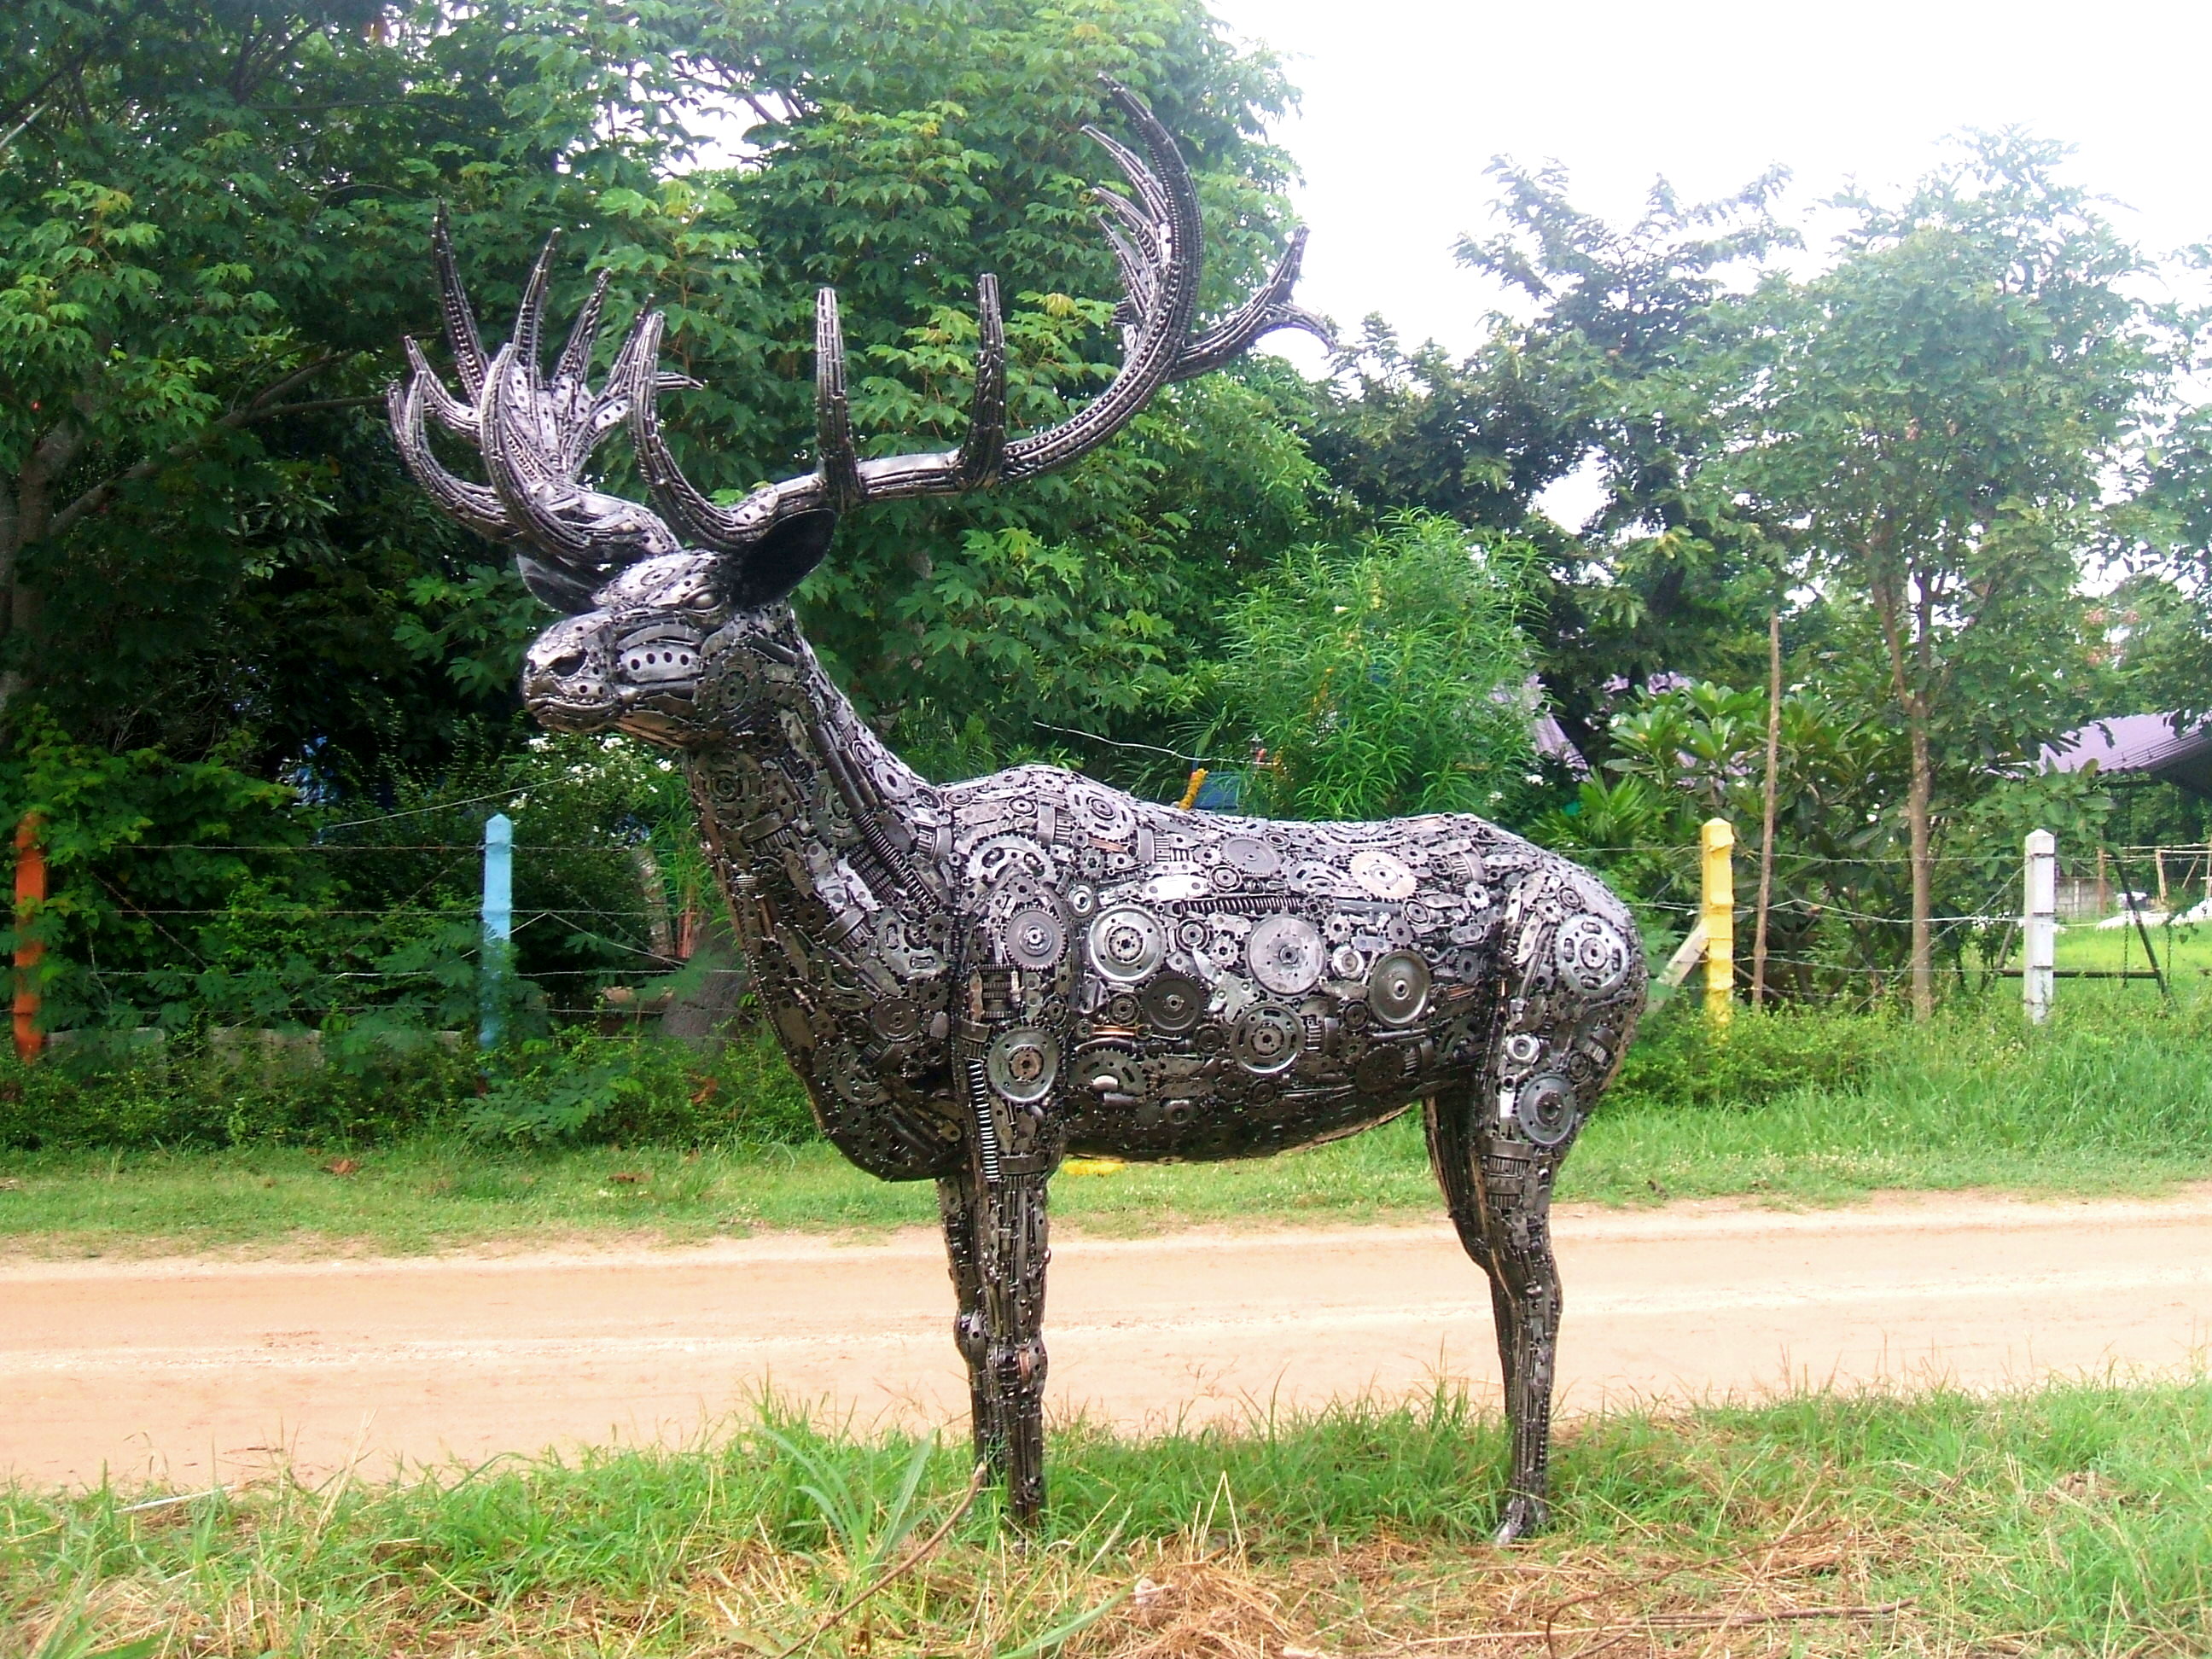 Custom Sculptures made from Recycled Metal by Tom ...